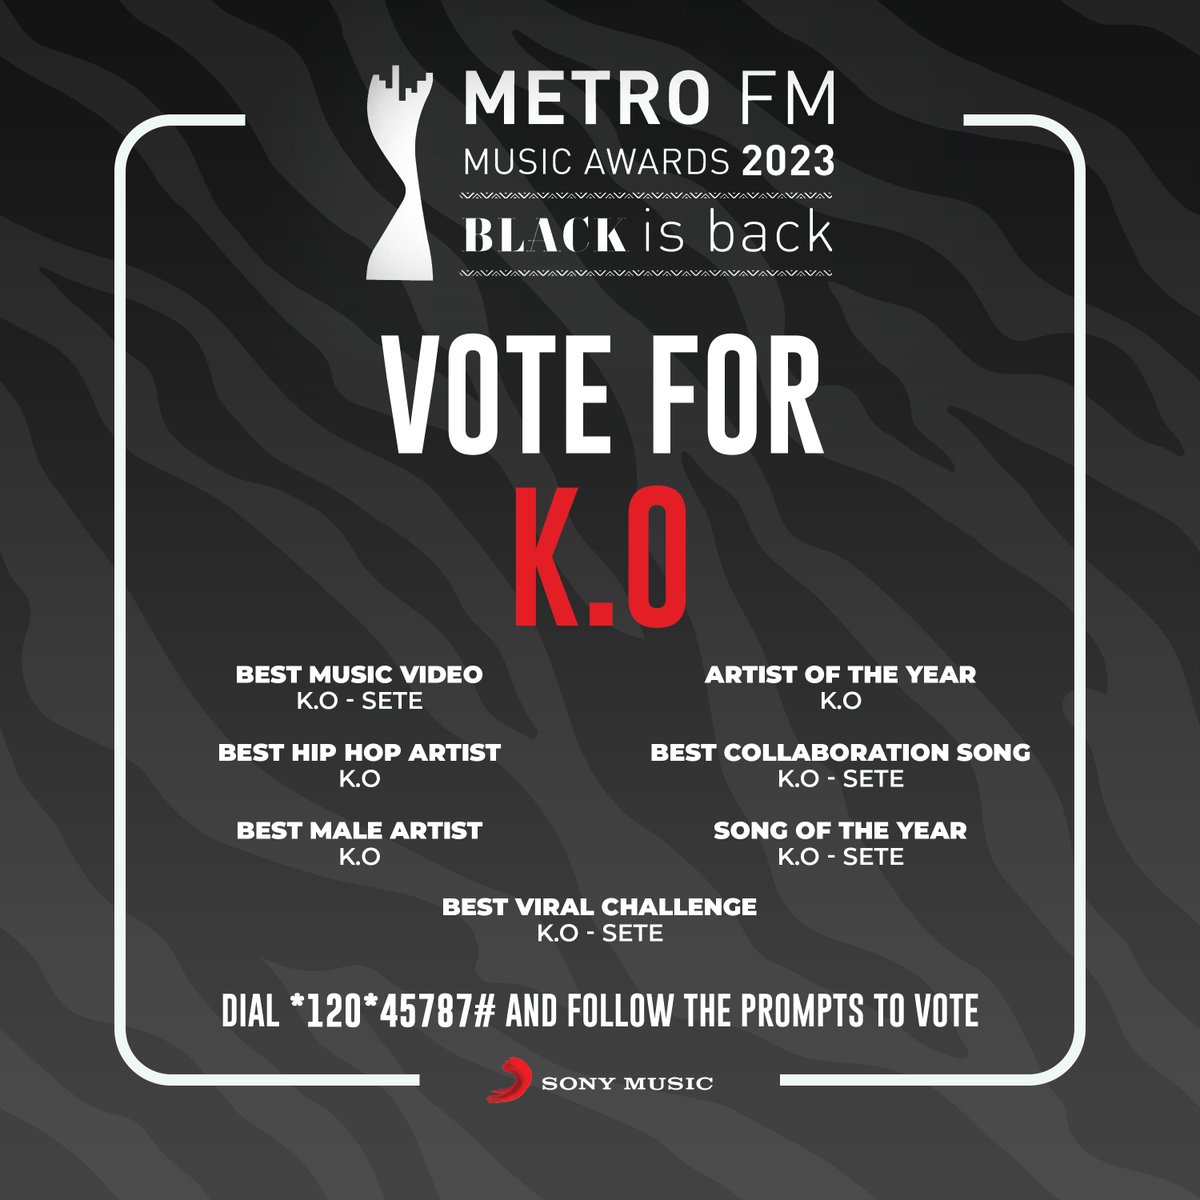 Vote for @MrCashtime in the following categories, voting line are up and running @METROFMSA Awards. 
#BestMusicVideo 
#ArtistOfTheYear
#BestHipHopArtist
#BestCollaborationSong
#BestMaleArtist
#SongOfTheYear